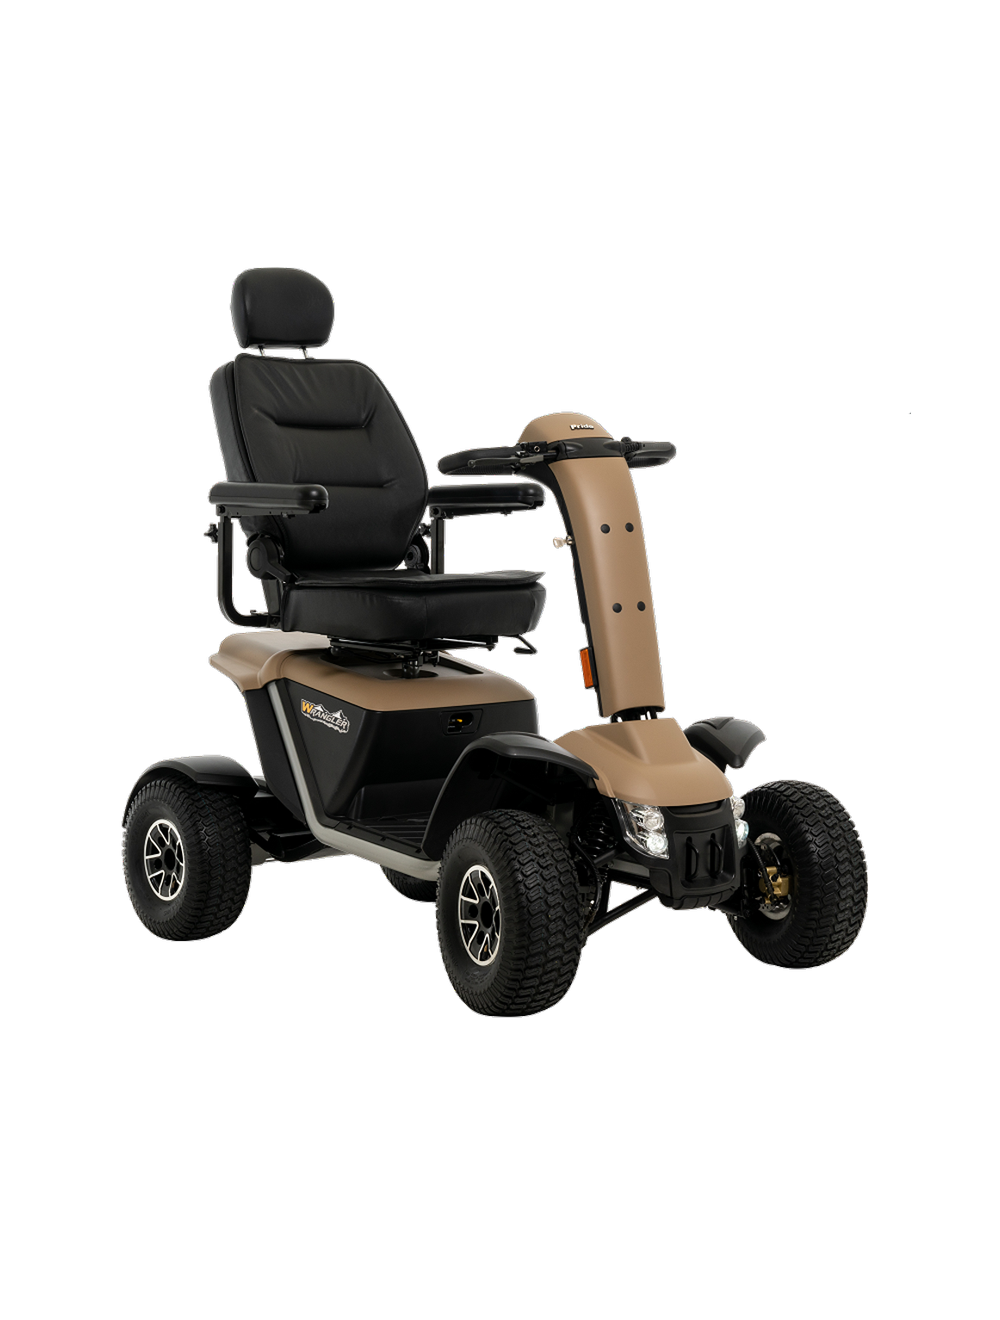 California Medical Supply Company Pride Wrangler 4-Wheel Mobility Scooter  AAA Medical Supply In San Diego